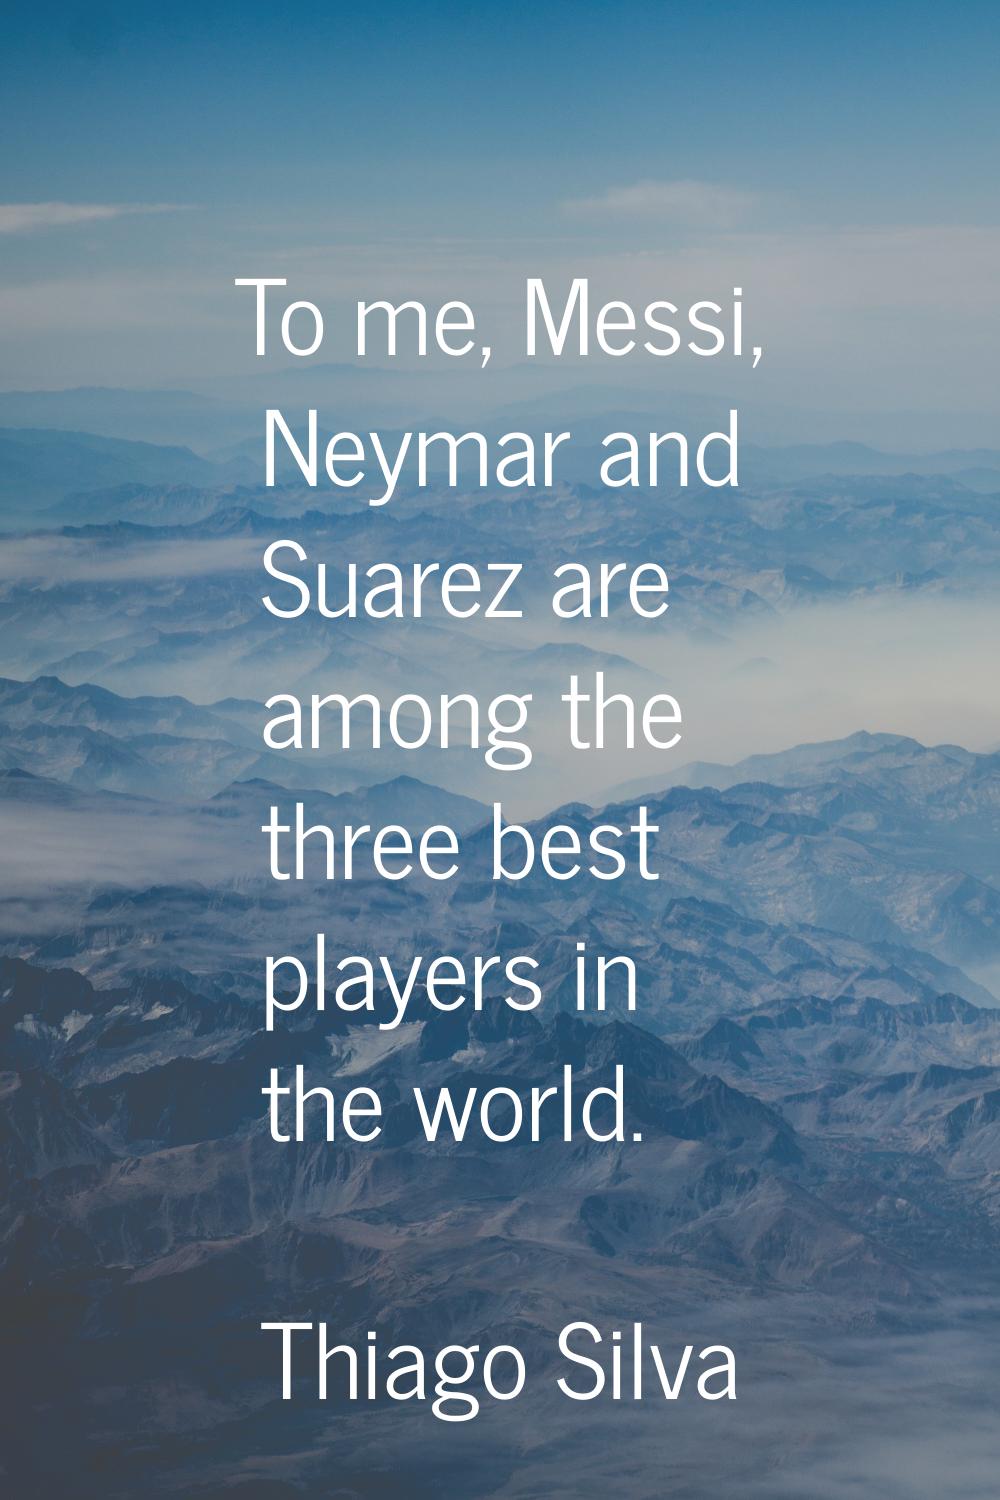 To me, Messi, Neymar and Suarez are among the three best players in the world.